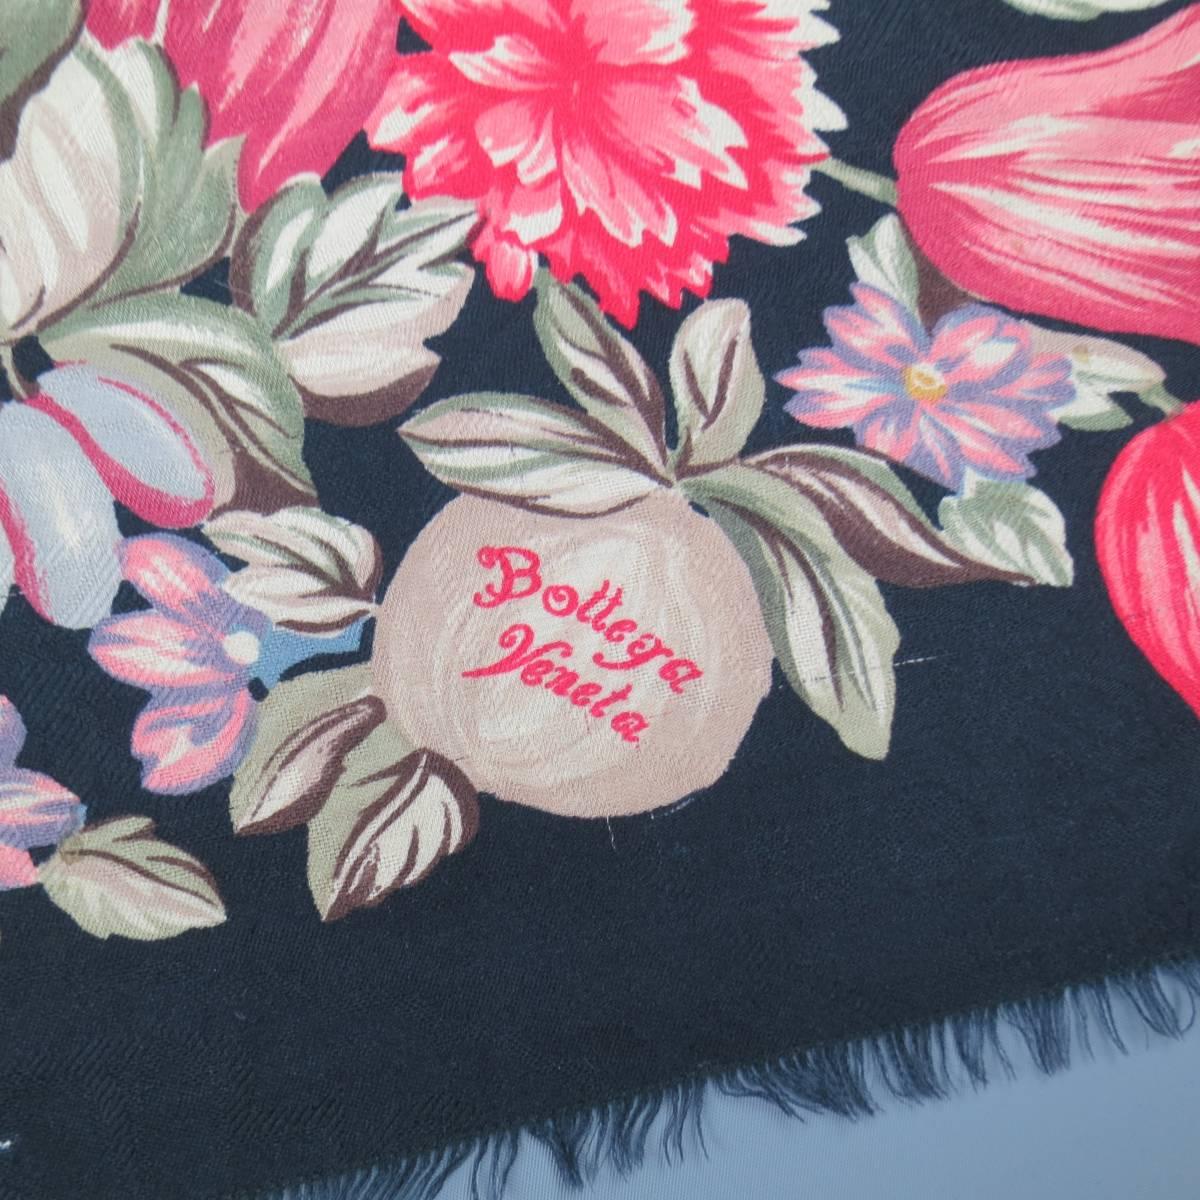 This gorgeous vintage BOTTEGA VENETA shawl comes in a soft black paisley textured wool silk blend gauze with raw fringed edges and all over multicolor floral print pattern. Tags removed. Made in Italy.
 
Good Pre-Owned Condition.
 
55 X 55 in.
